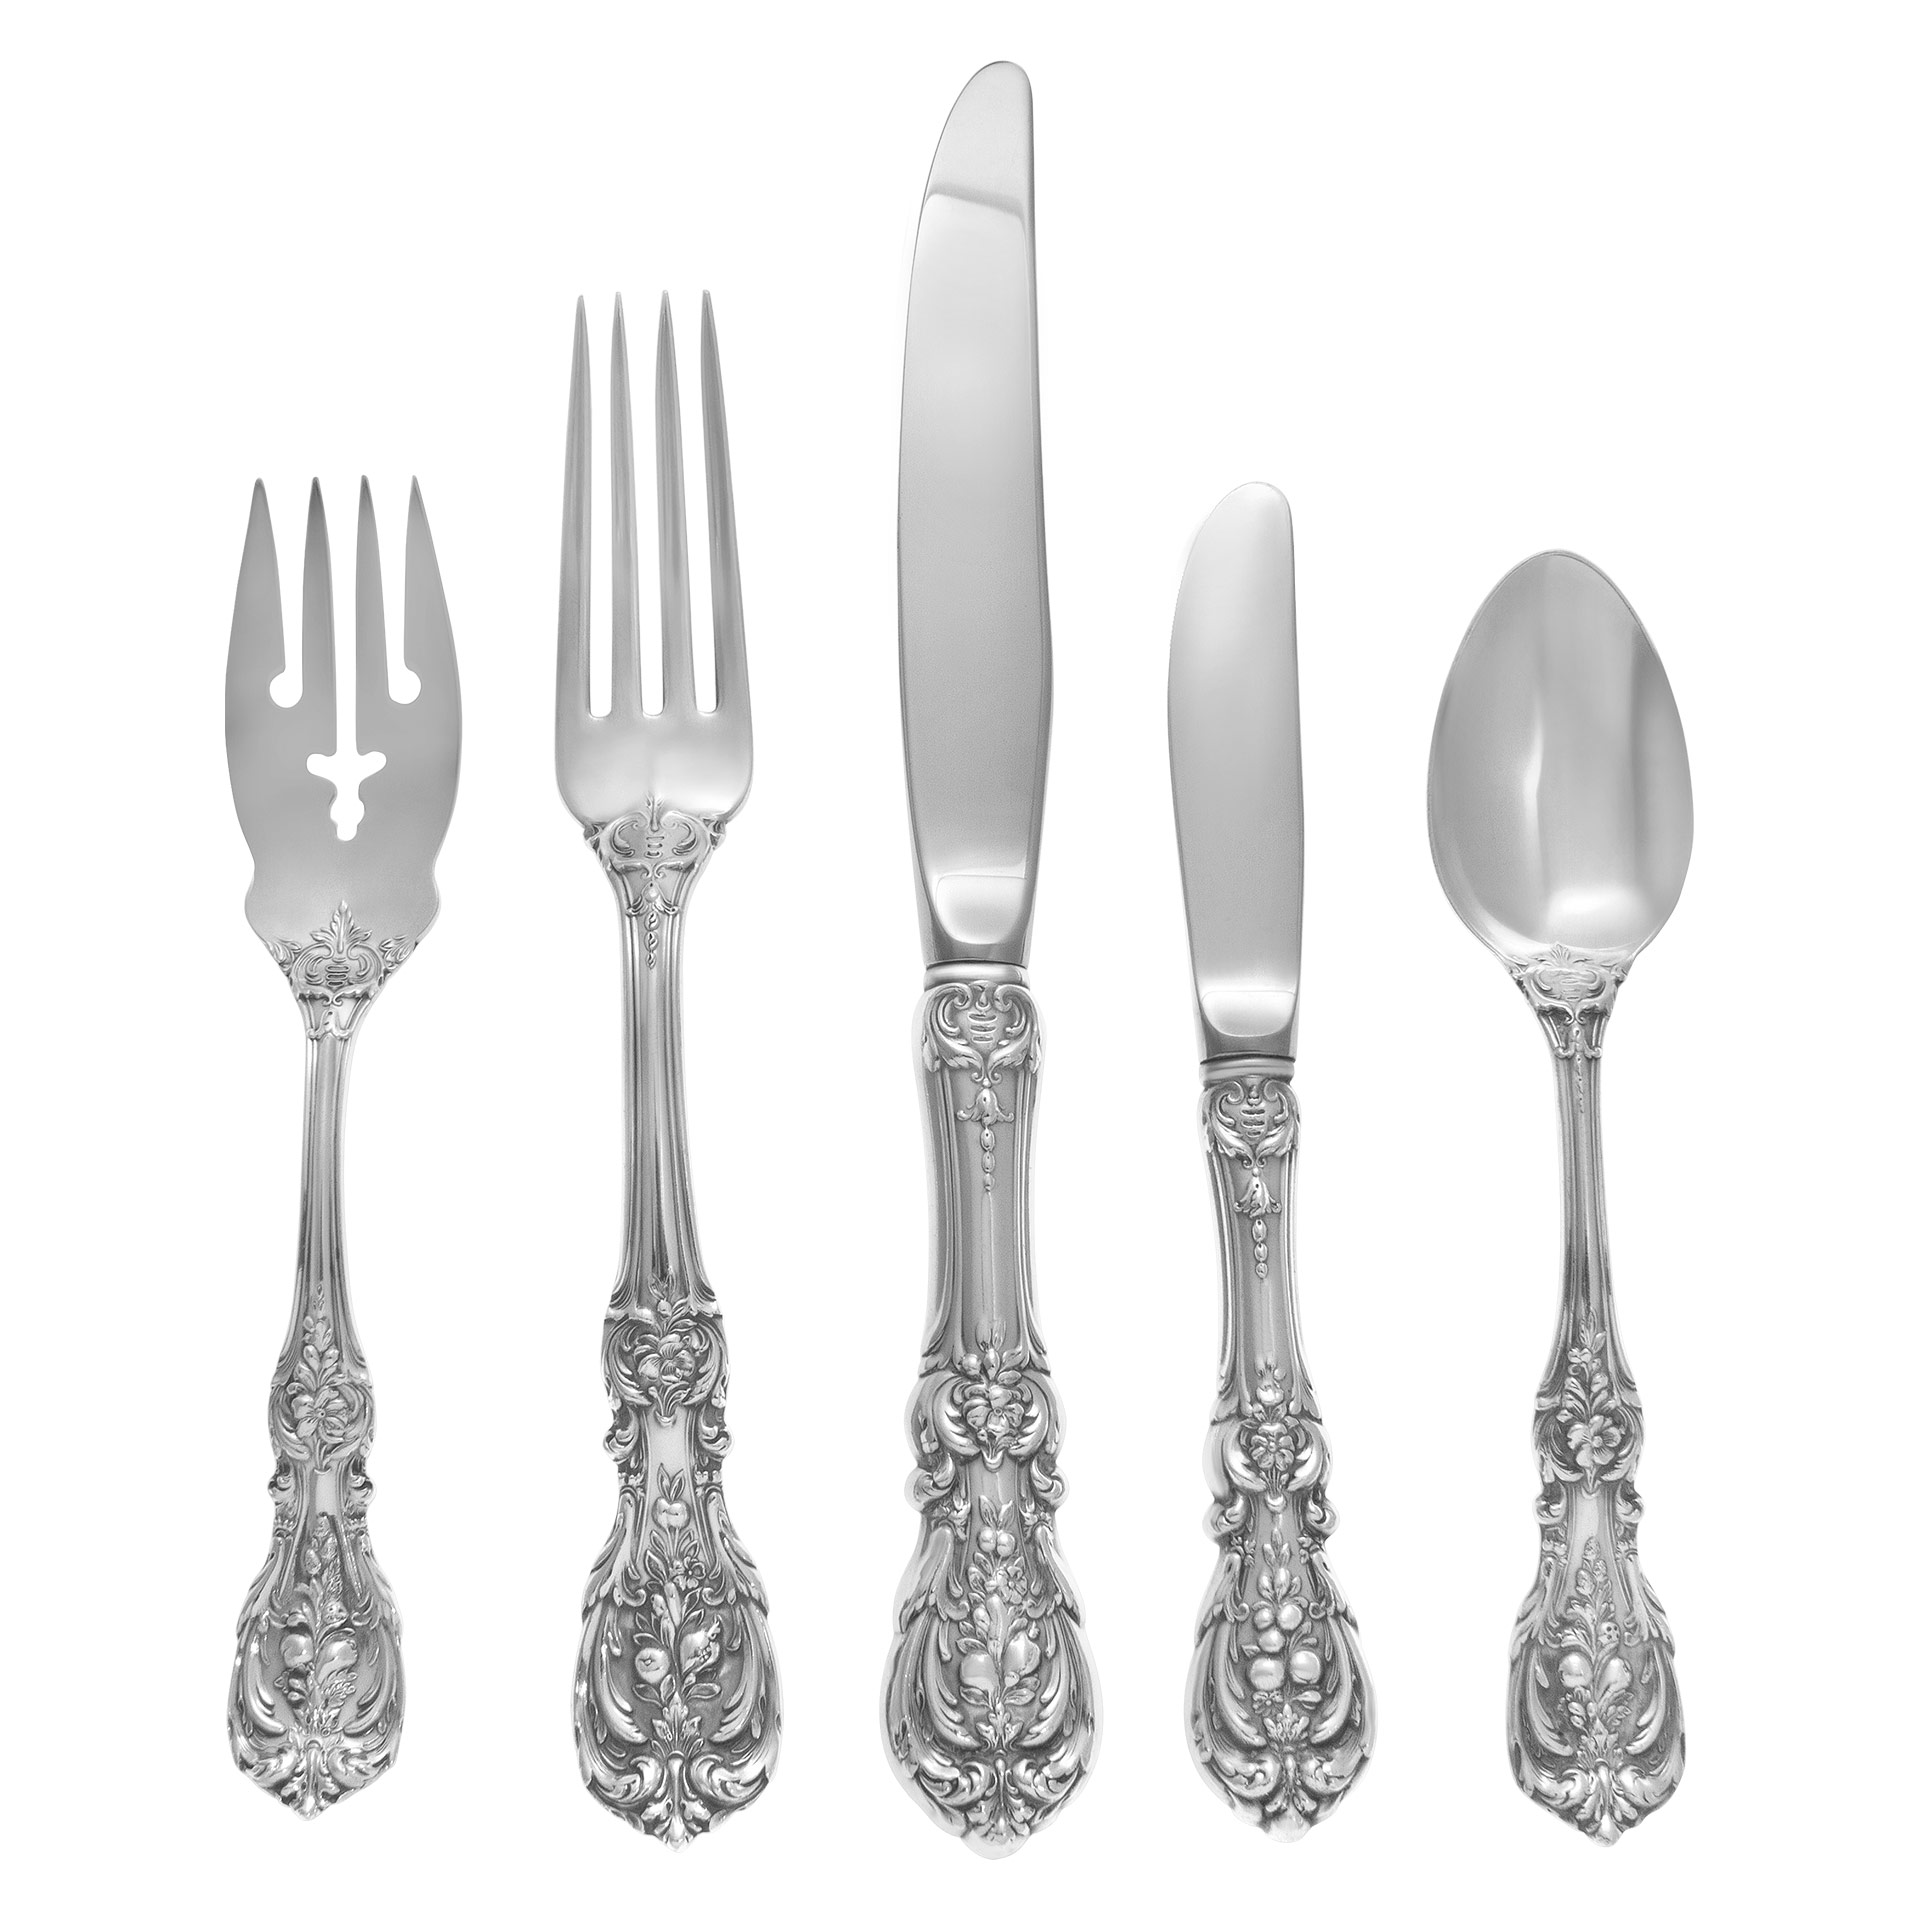 FRANCIS THE FIRST sterling silver flatware set patented in 1907 by Reed & Barton- TOTAL 58 PIECES- 4 place set for 10 (with xtras) and 5 serving pieces. image 1